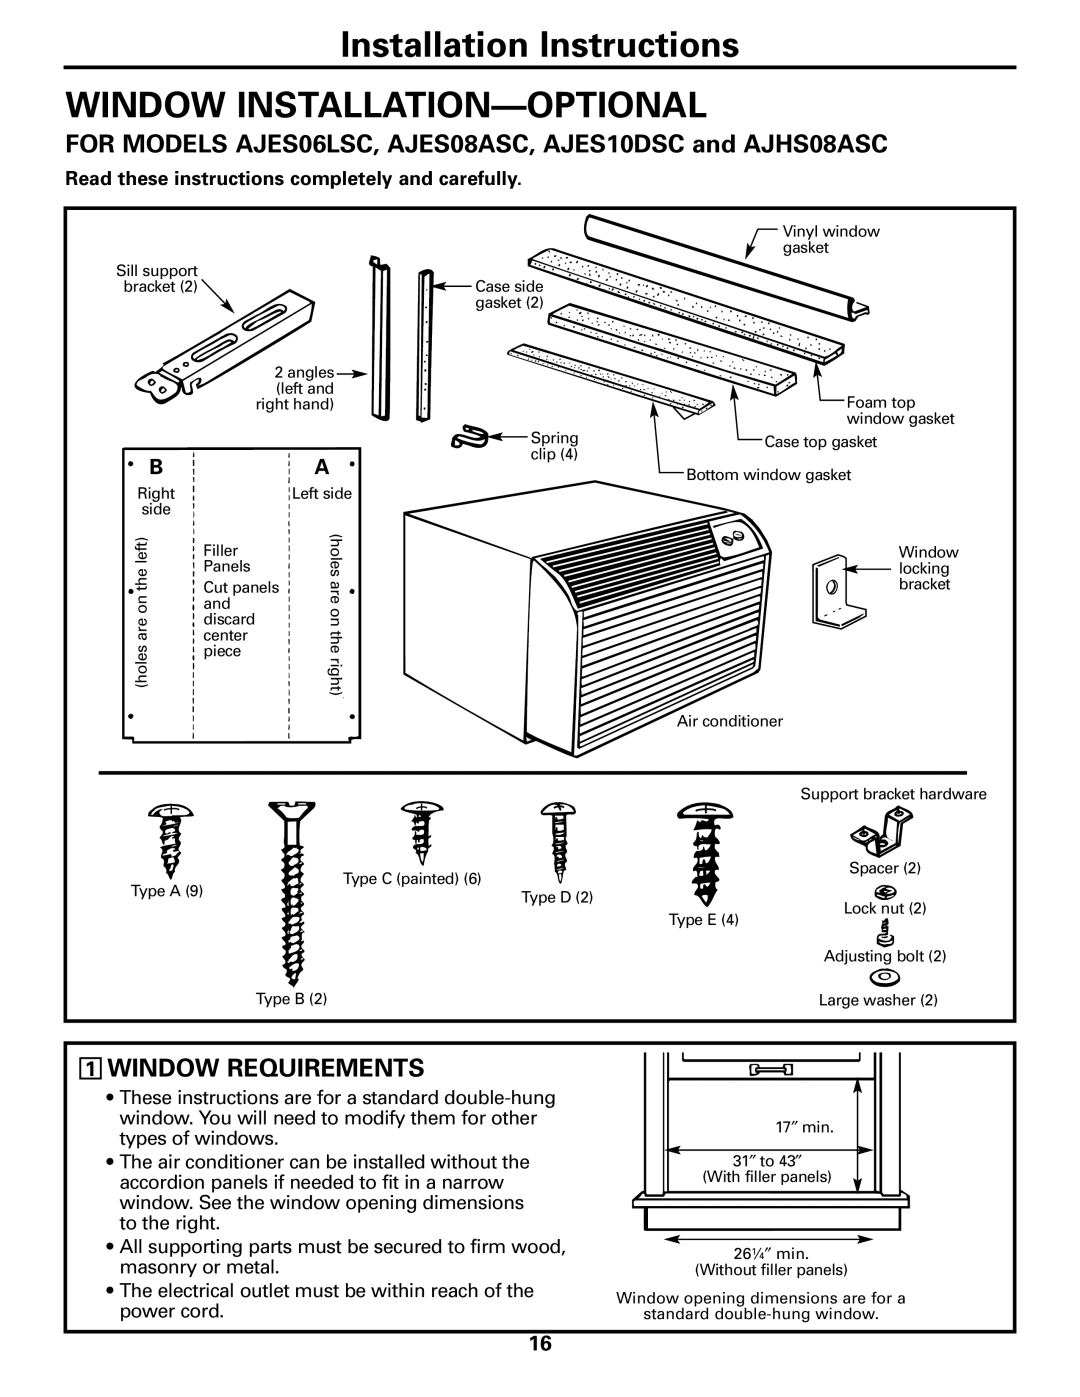 GE AJHS10DCC installation instructions Window Installation-Optional, Installation Instructions, Window Requirements 